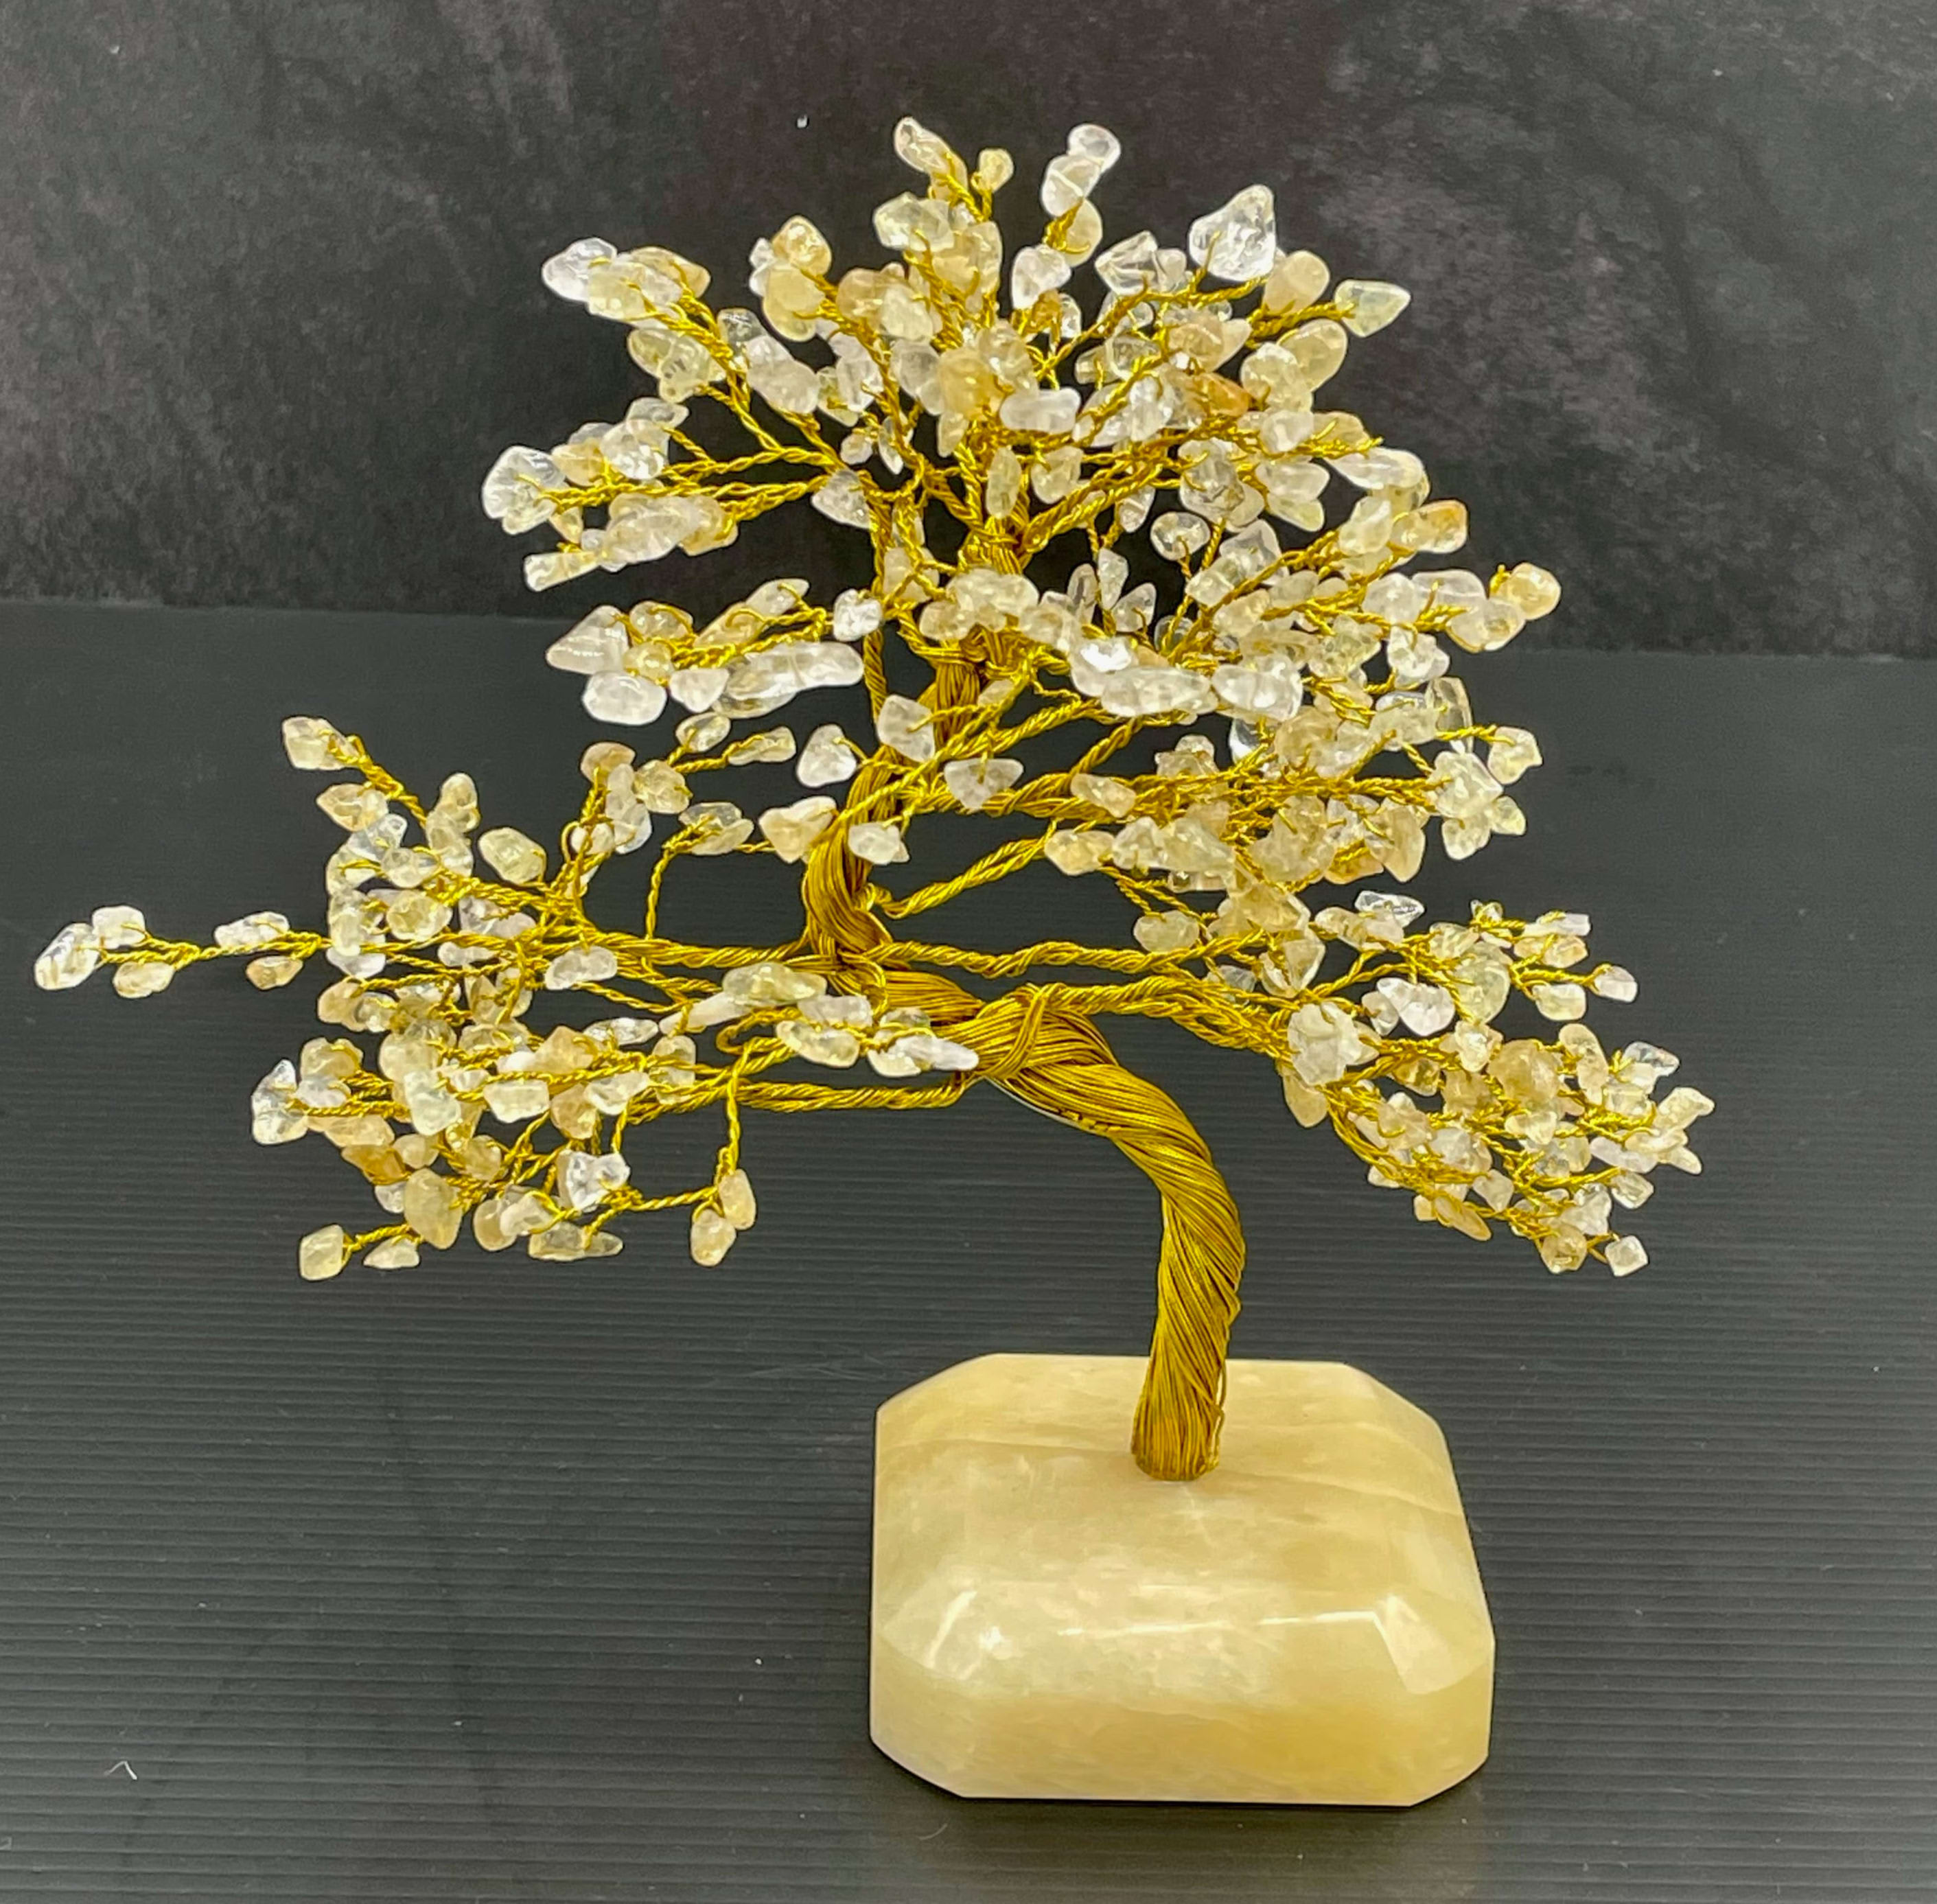 8&quot; Natural Citrine Lucky Tree - Enhances power and promotes good health. Approximate Height: 8 inches  Base Dimension: 3.2 Length X 3.2 Width inches Approximate Weight: 520 Grams Base may vary.